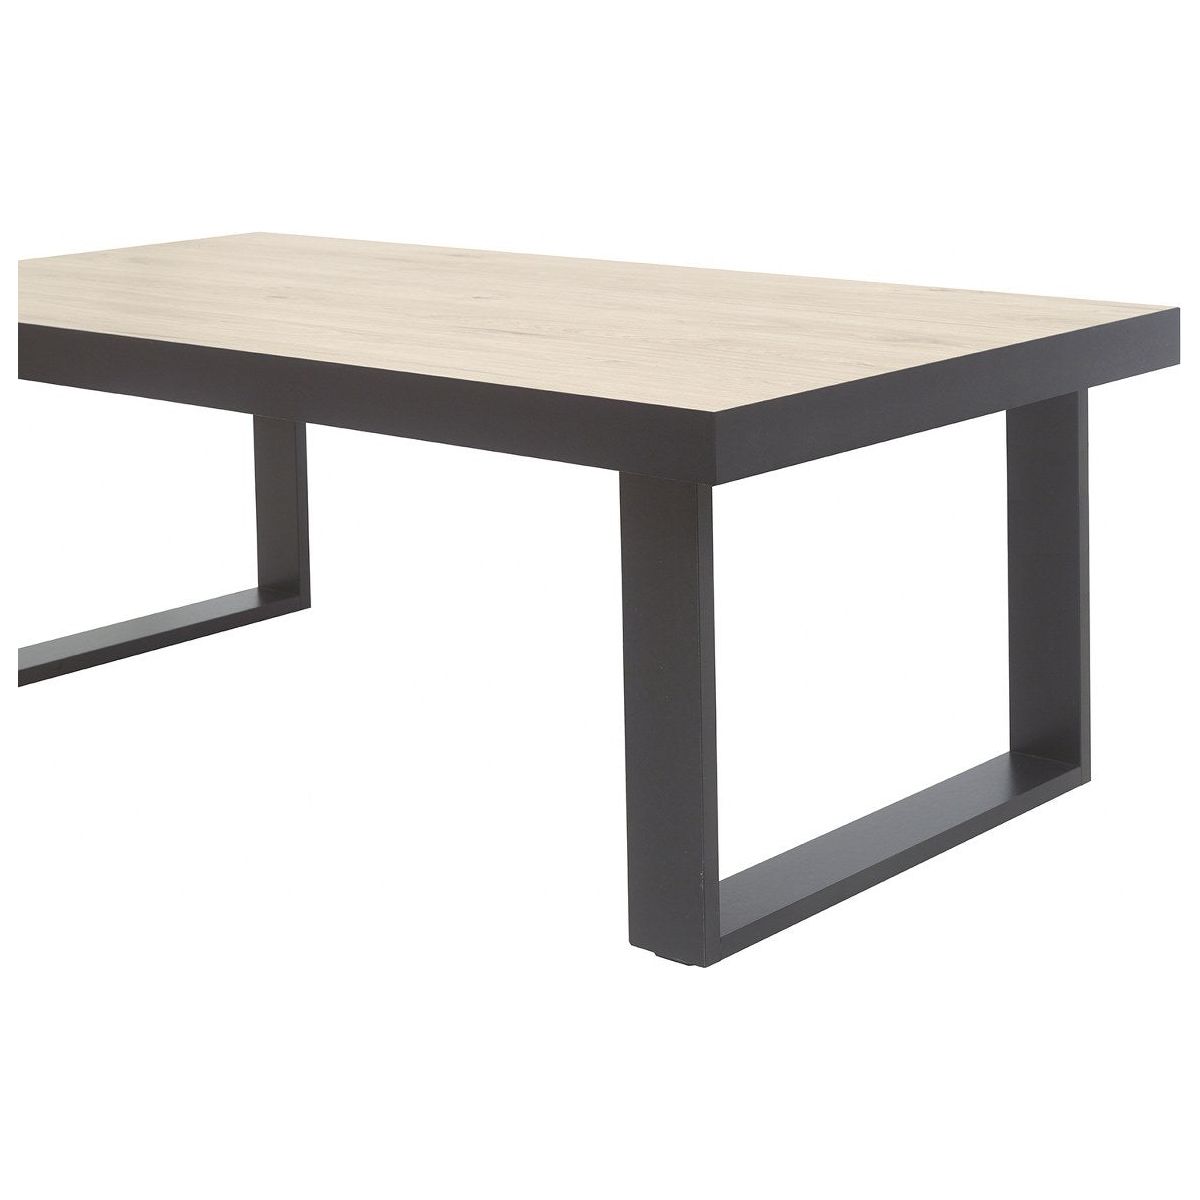 Coffee table | Furniture series Dylan | natural, black | 130x68x